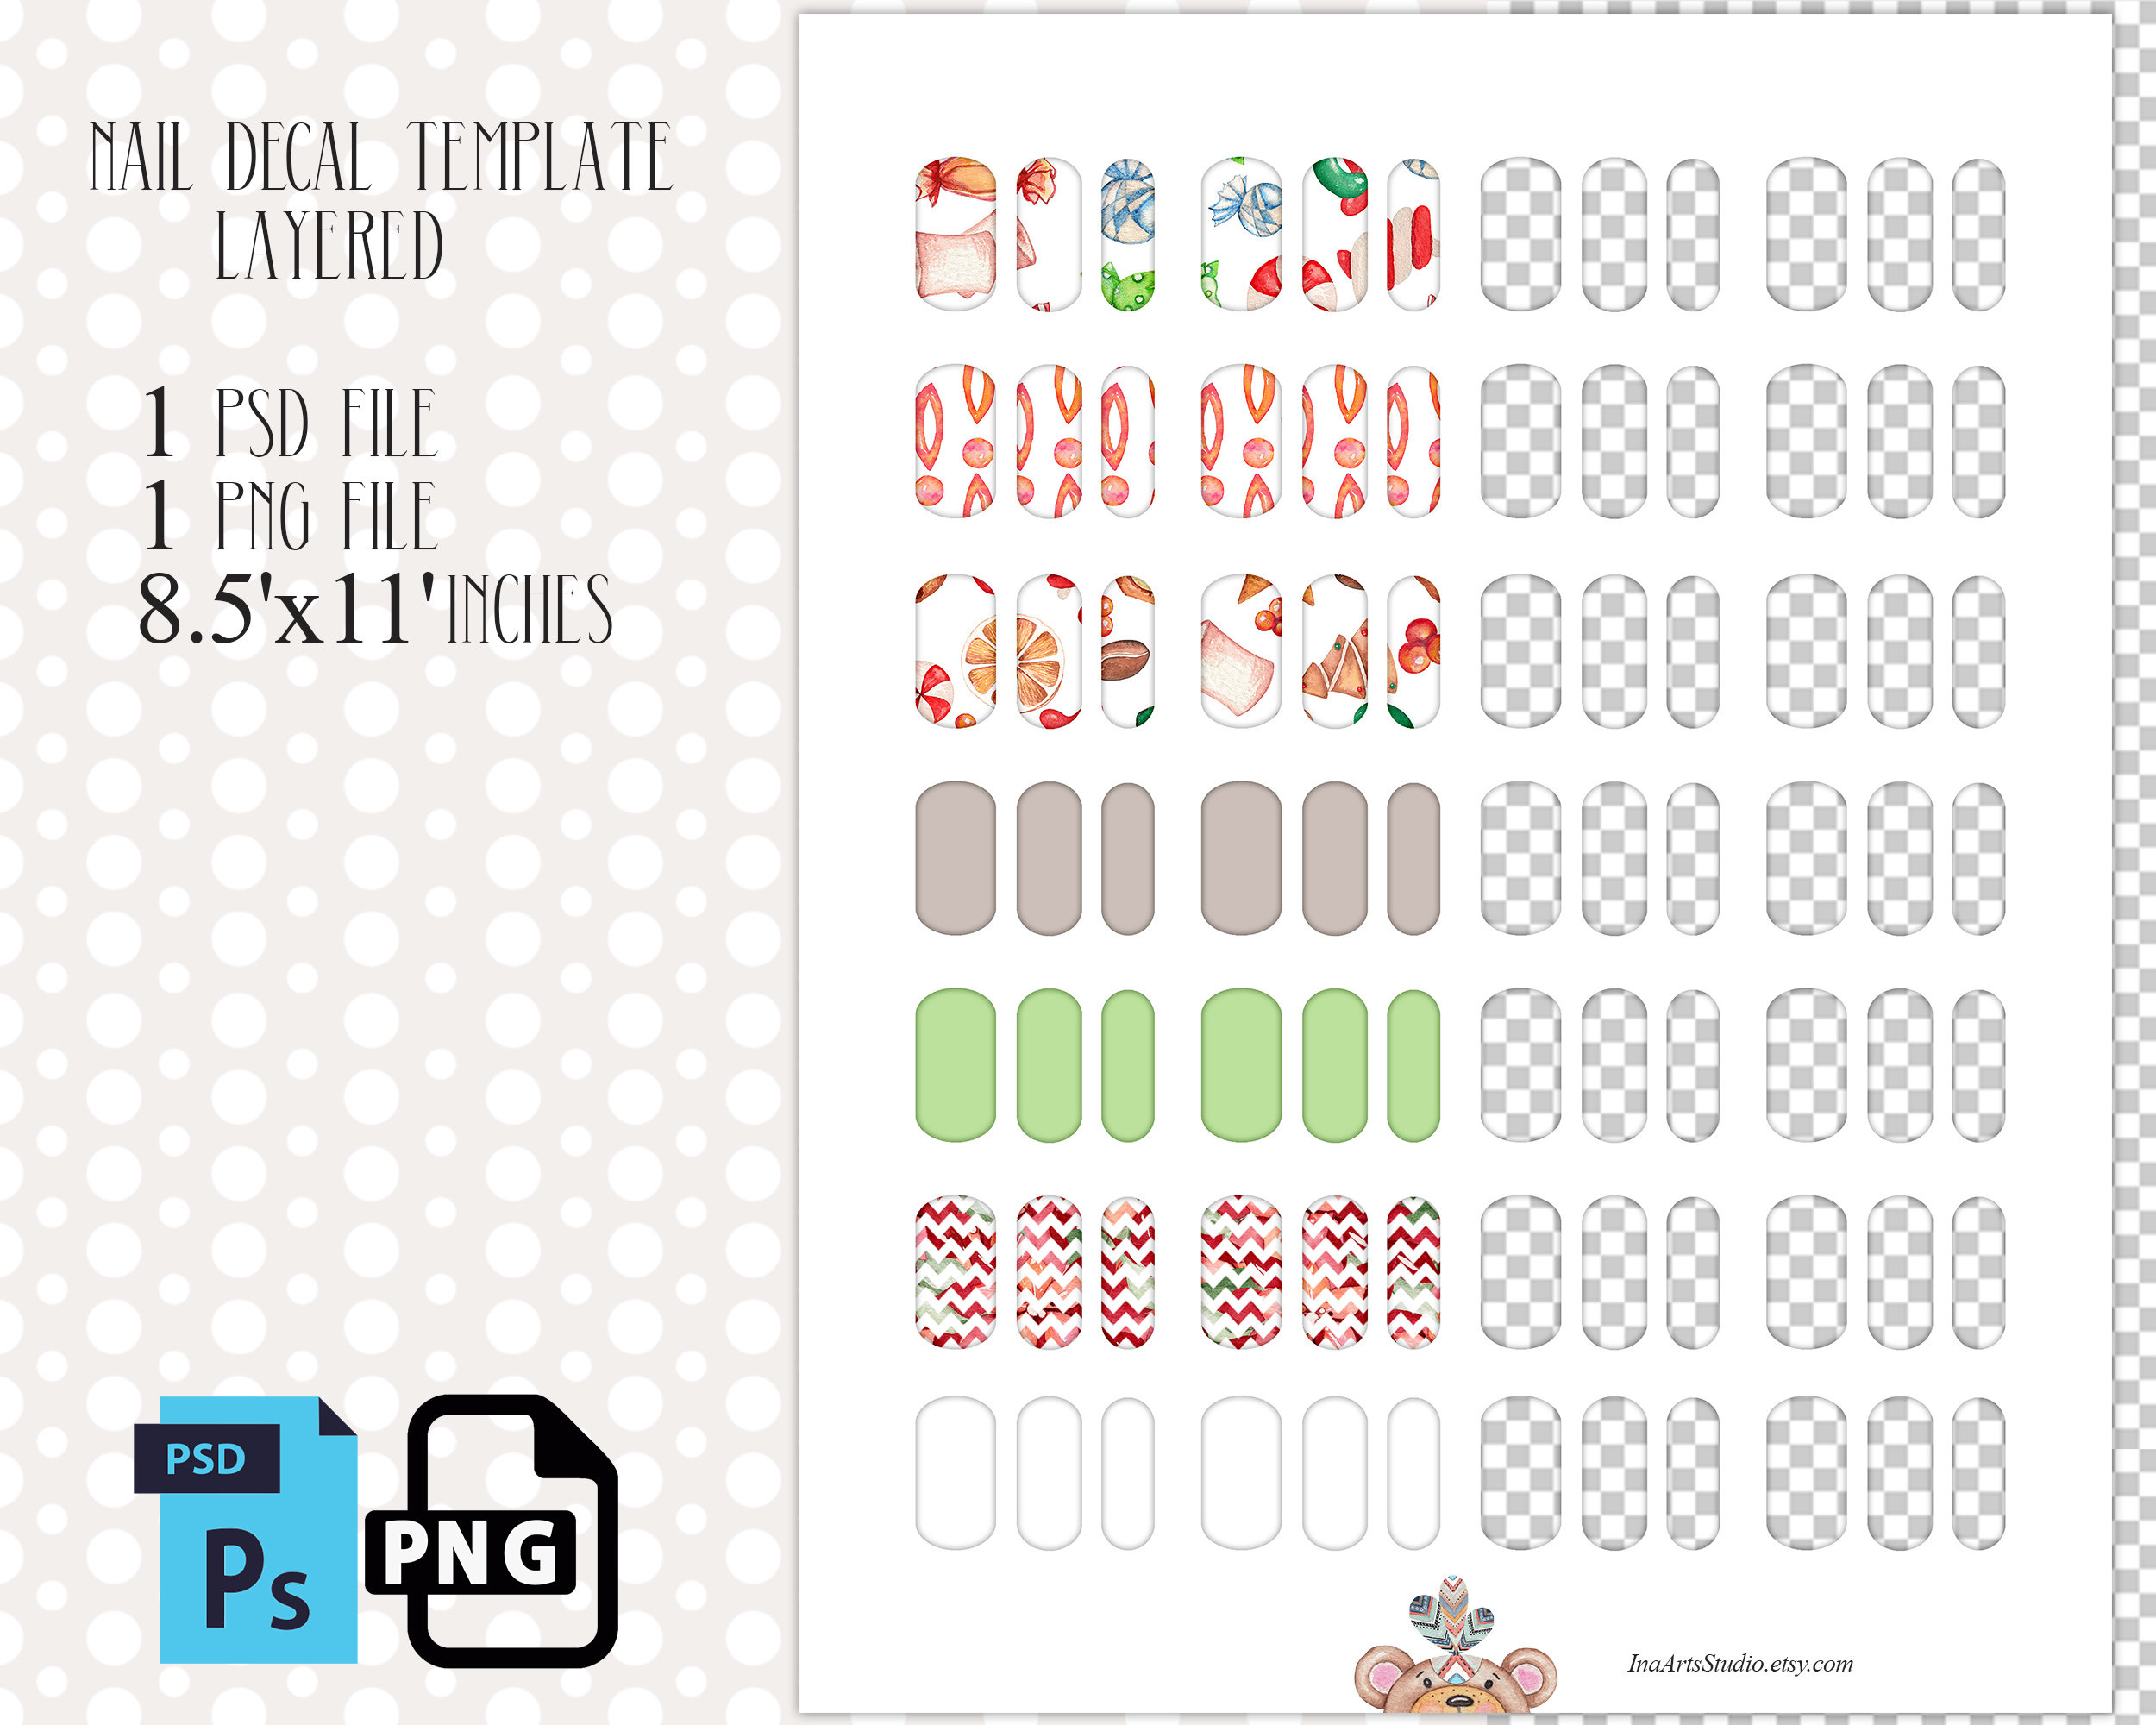 8. Nail Art Stickers - wide 2